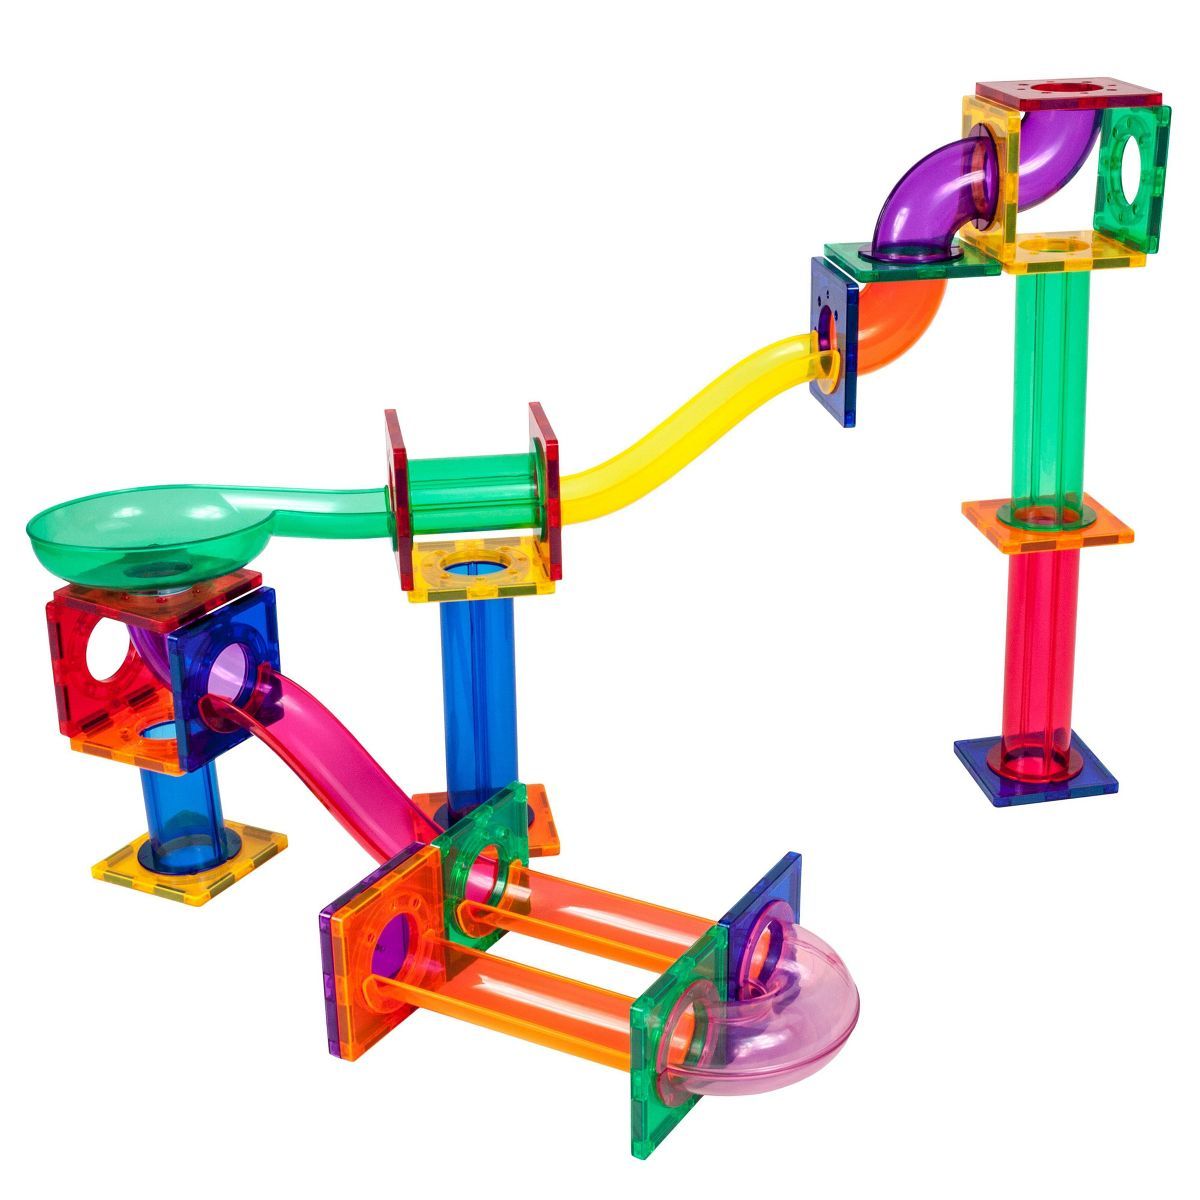 Picasso Tiles Magnetic Marble Run 50pc Building Set | Target